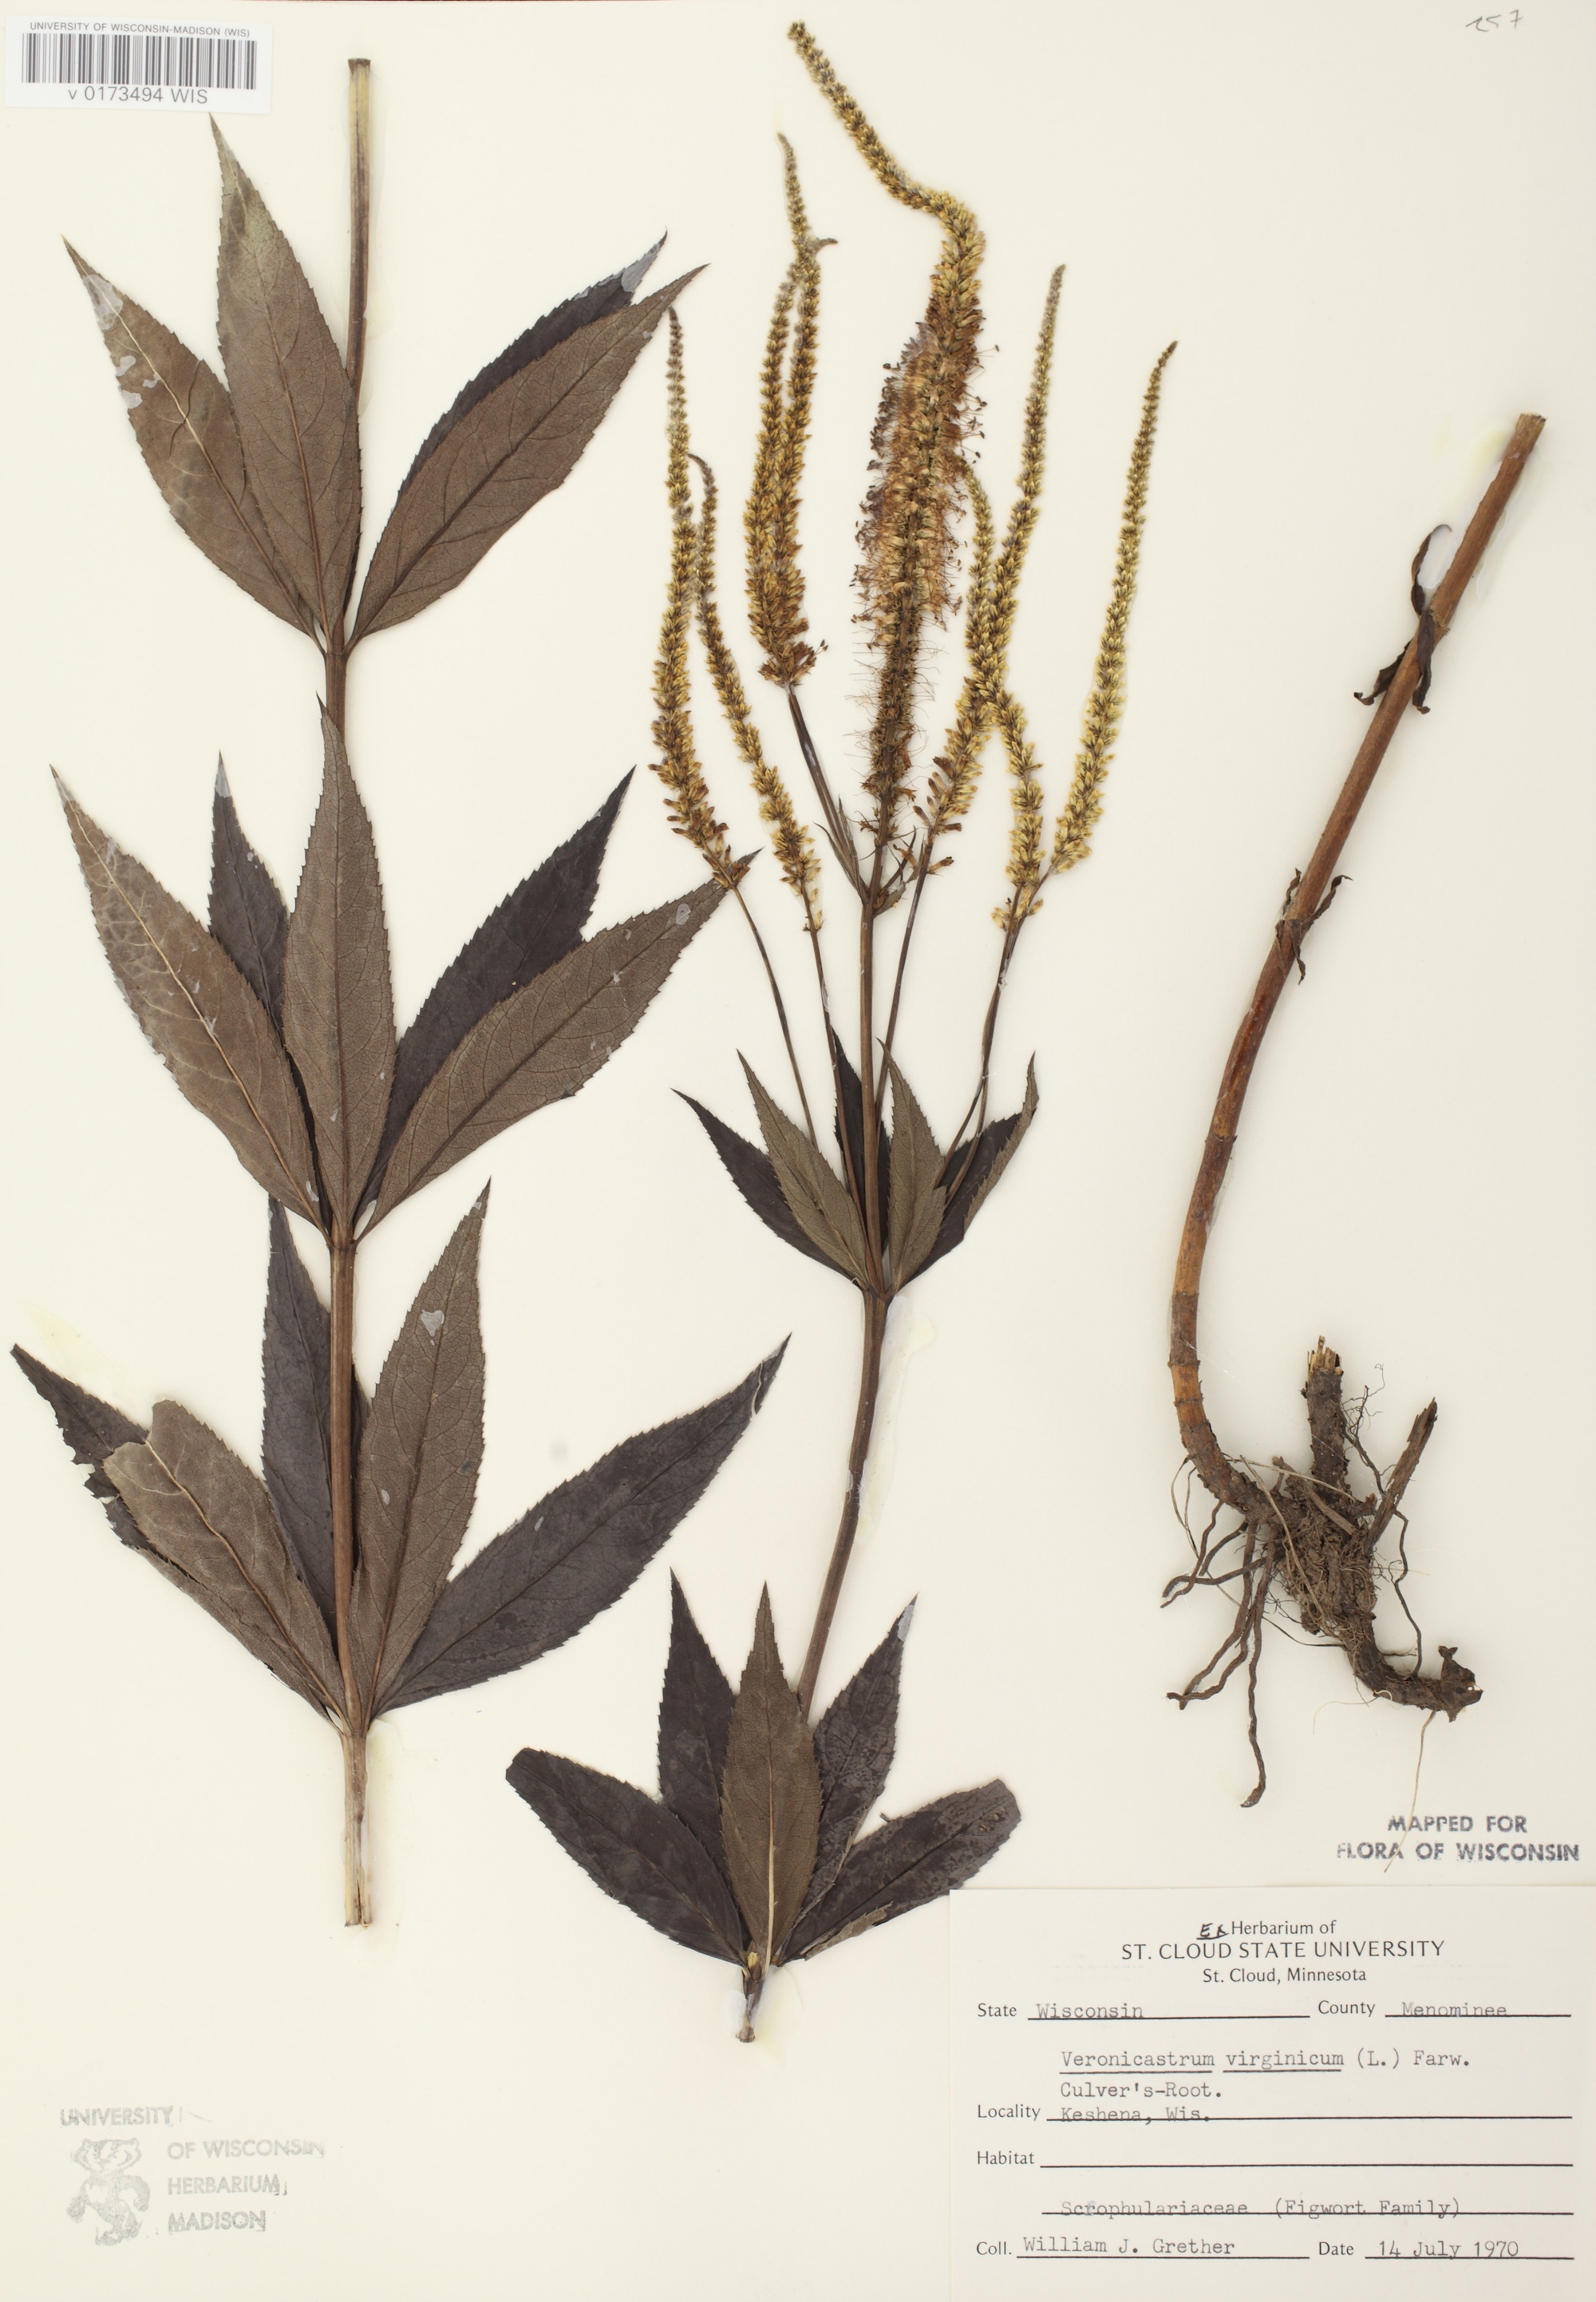 Culver's Root specimen collected on July 14, 1970 in Keshena in Menominee County.